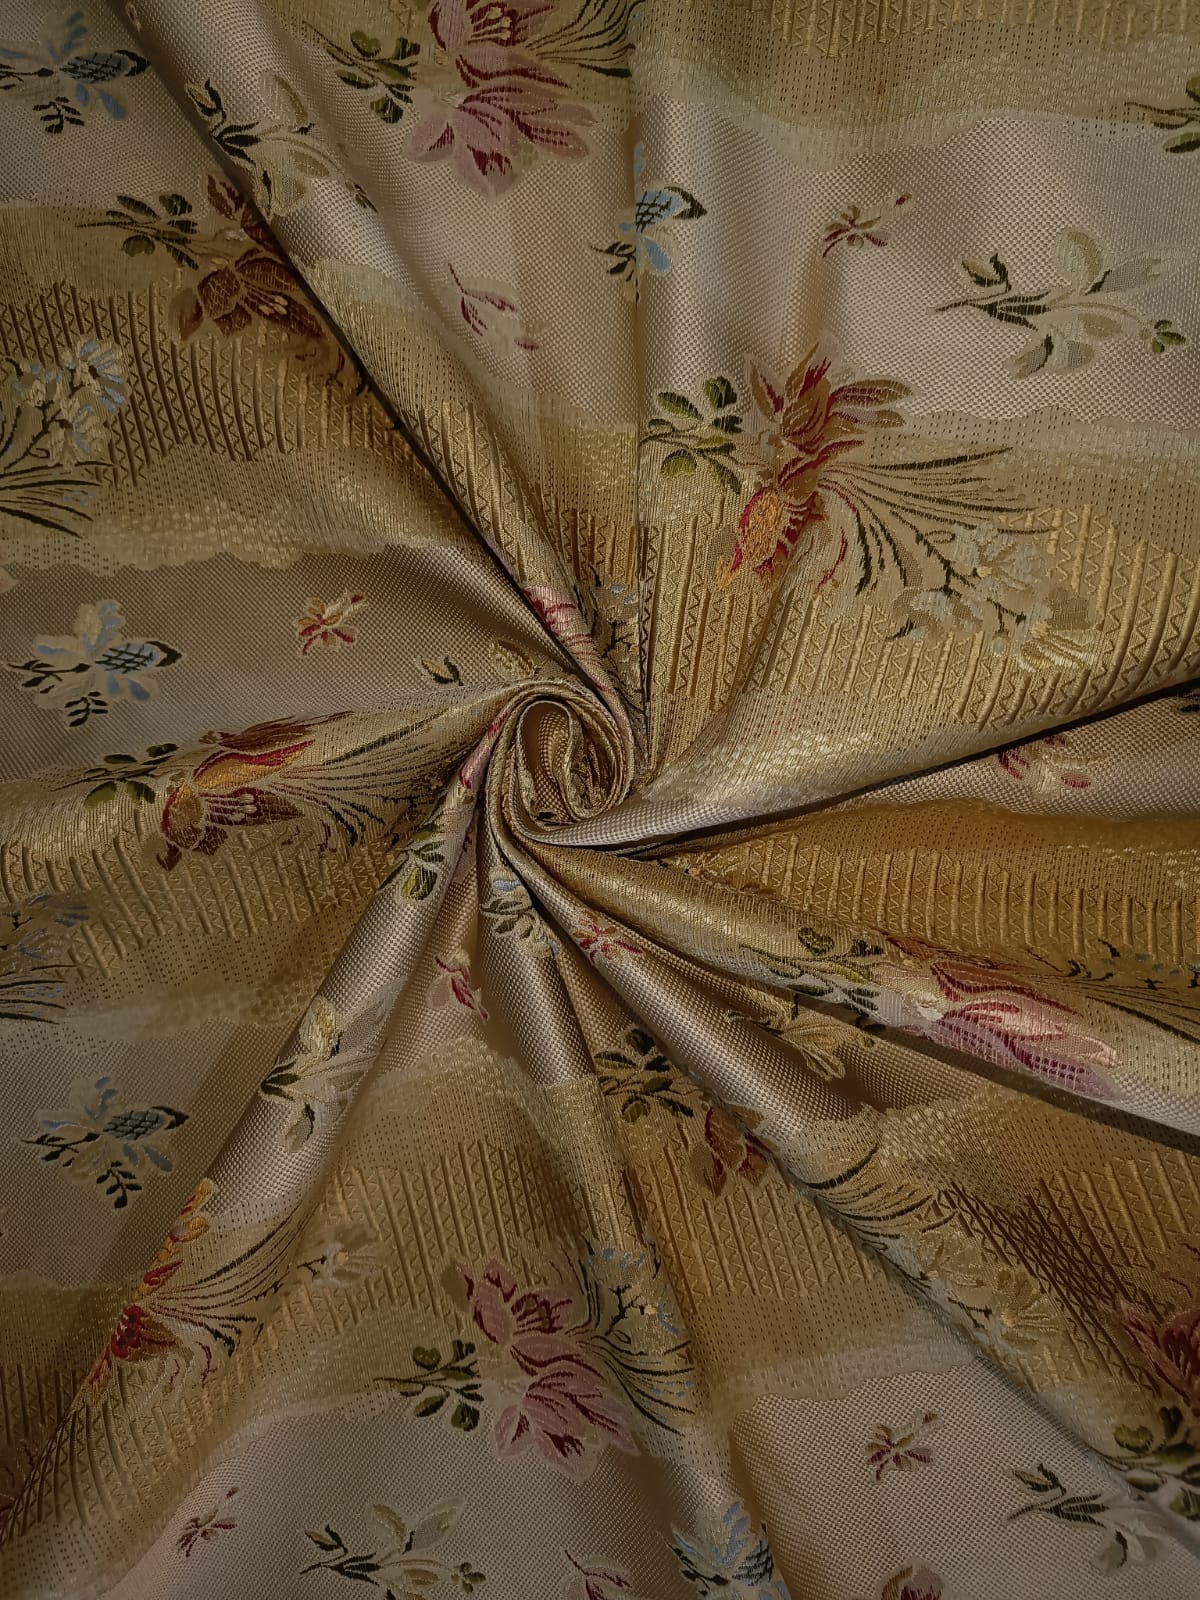 100% Silk Taffeta Jacquard Fabric  gold with floral jacquard stripes and floral embroidery  54" wide 74.70MOMME TAFJACNEW9 available for bulk preorder